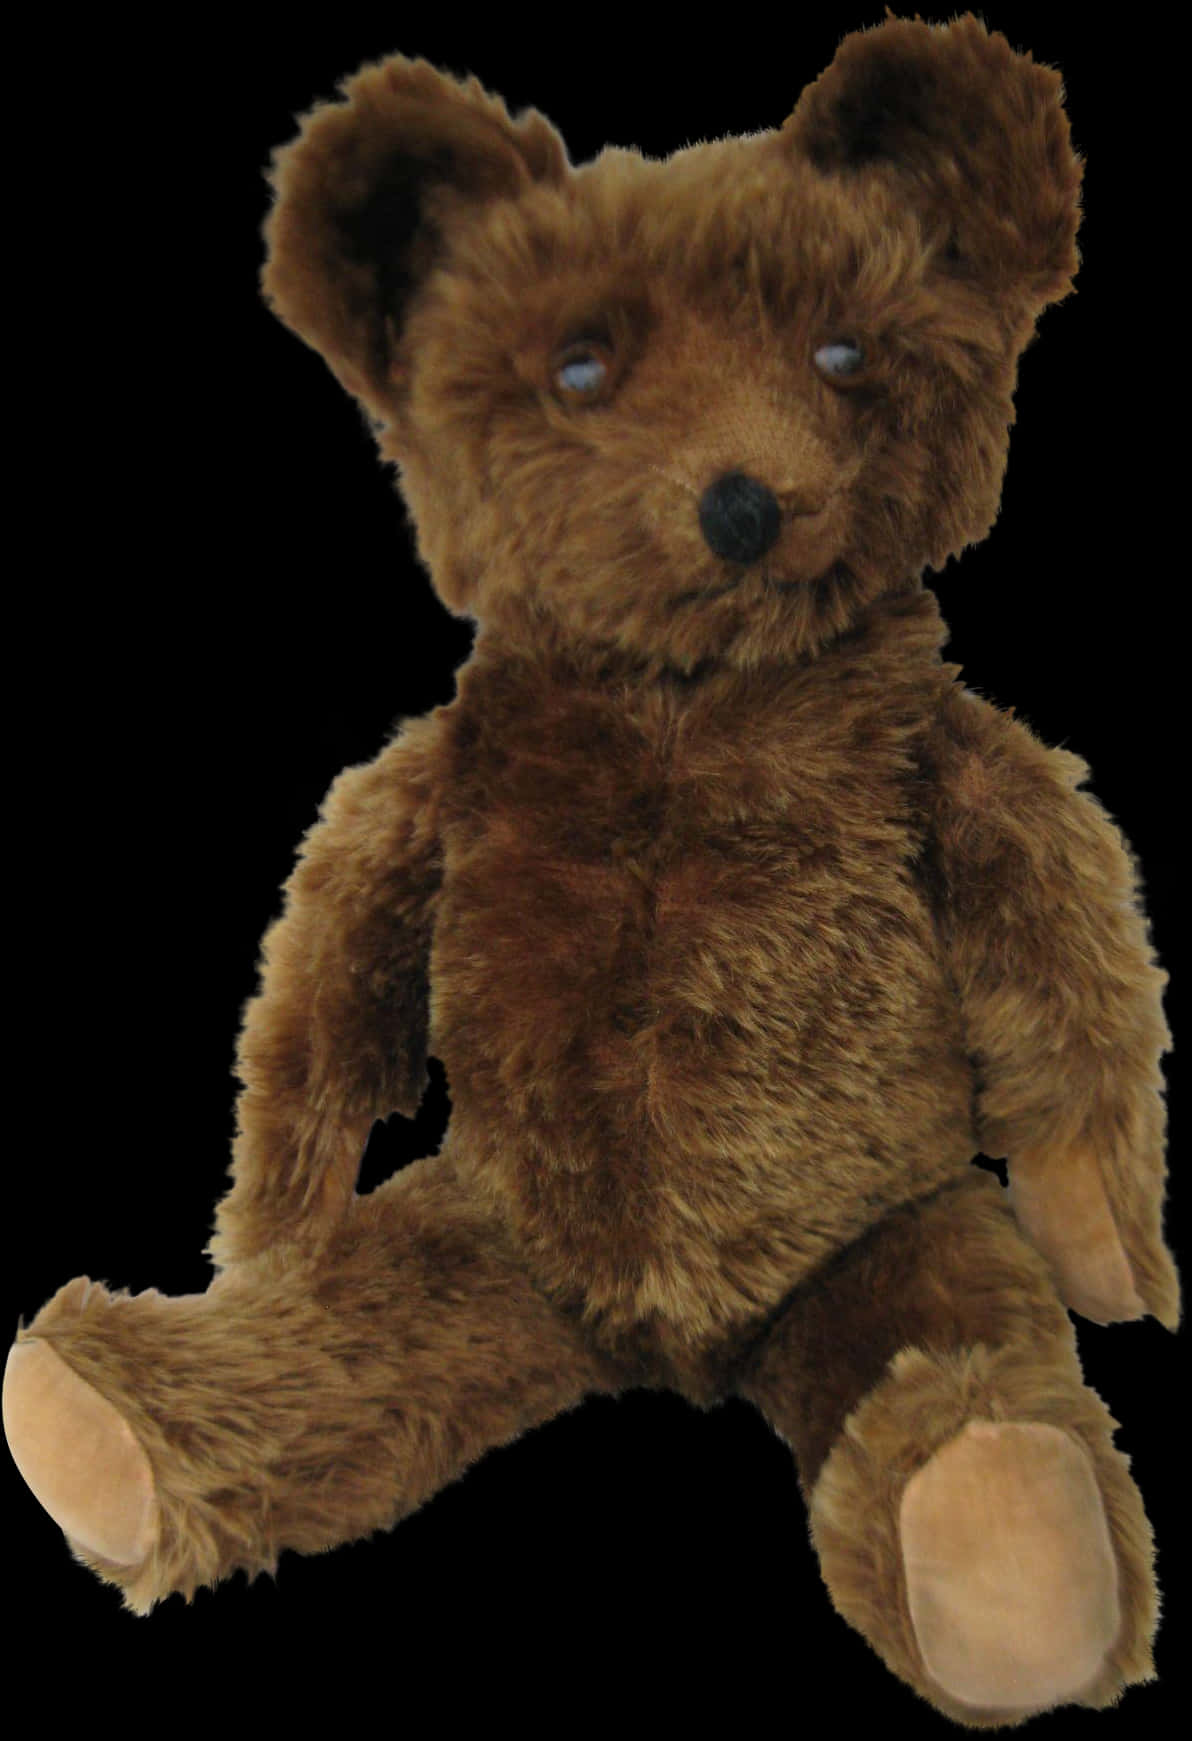 A Stuffed Bear With A Black Background